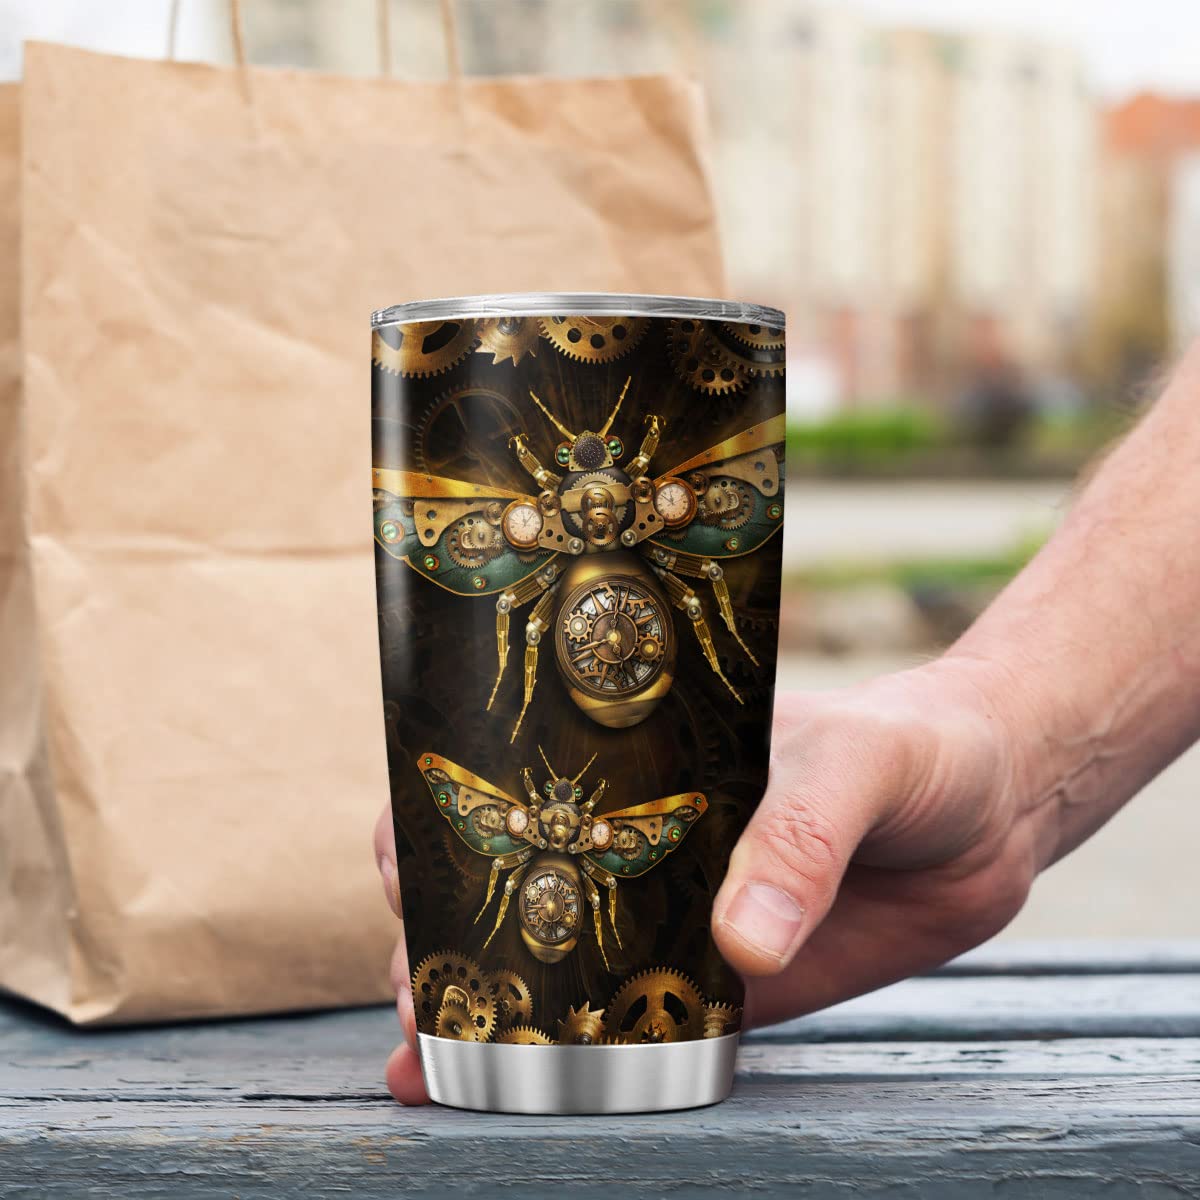 9SUNFLOWER Bee Coffee Tumbler Mechanic Style Birthday Gifts For Girls Women Boys Friends Steampunk Travel Mug With Lid Insulated Cold Drink Cup Inspirational Quotes Drinking Cups